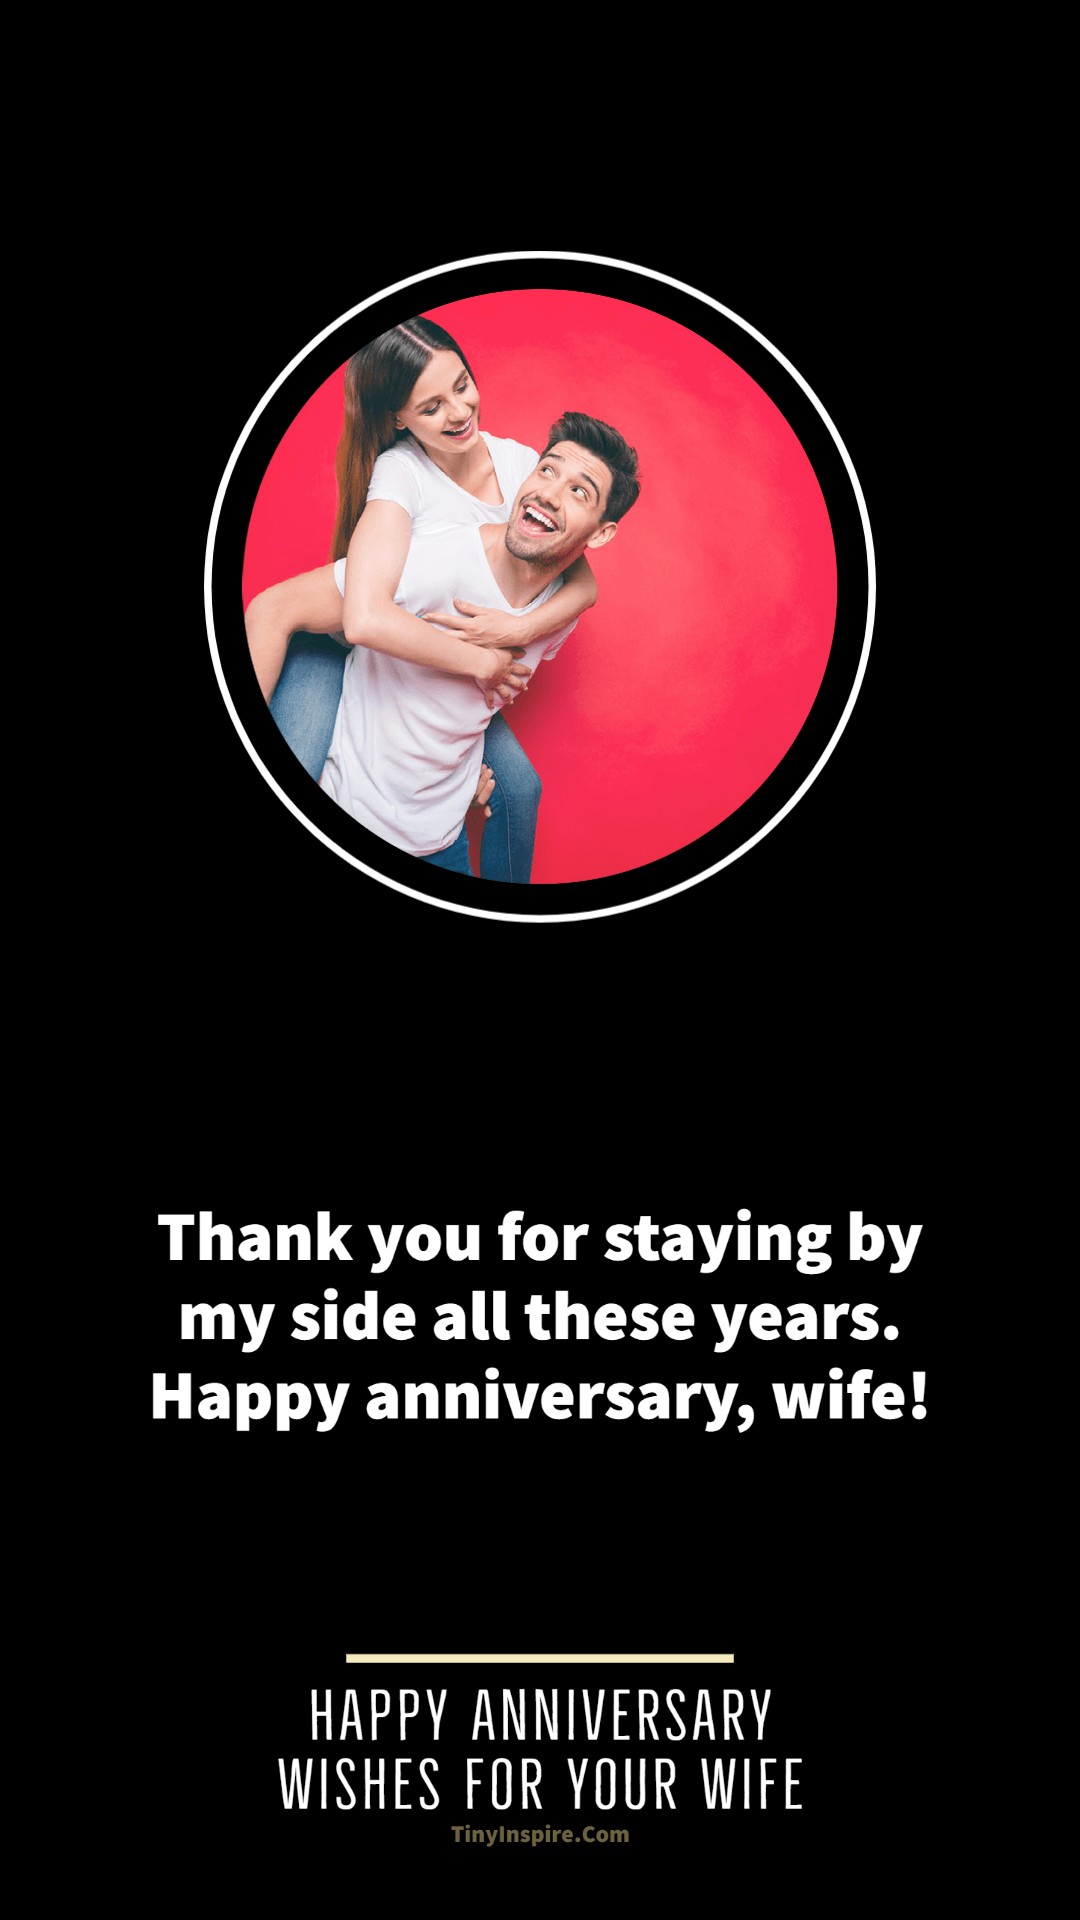 wedding anniversary wishes and quotes for wife